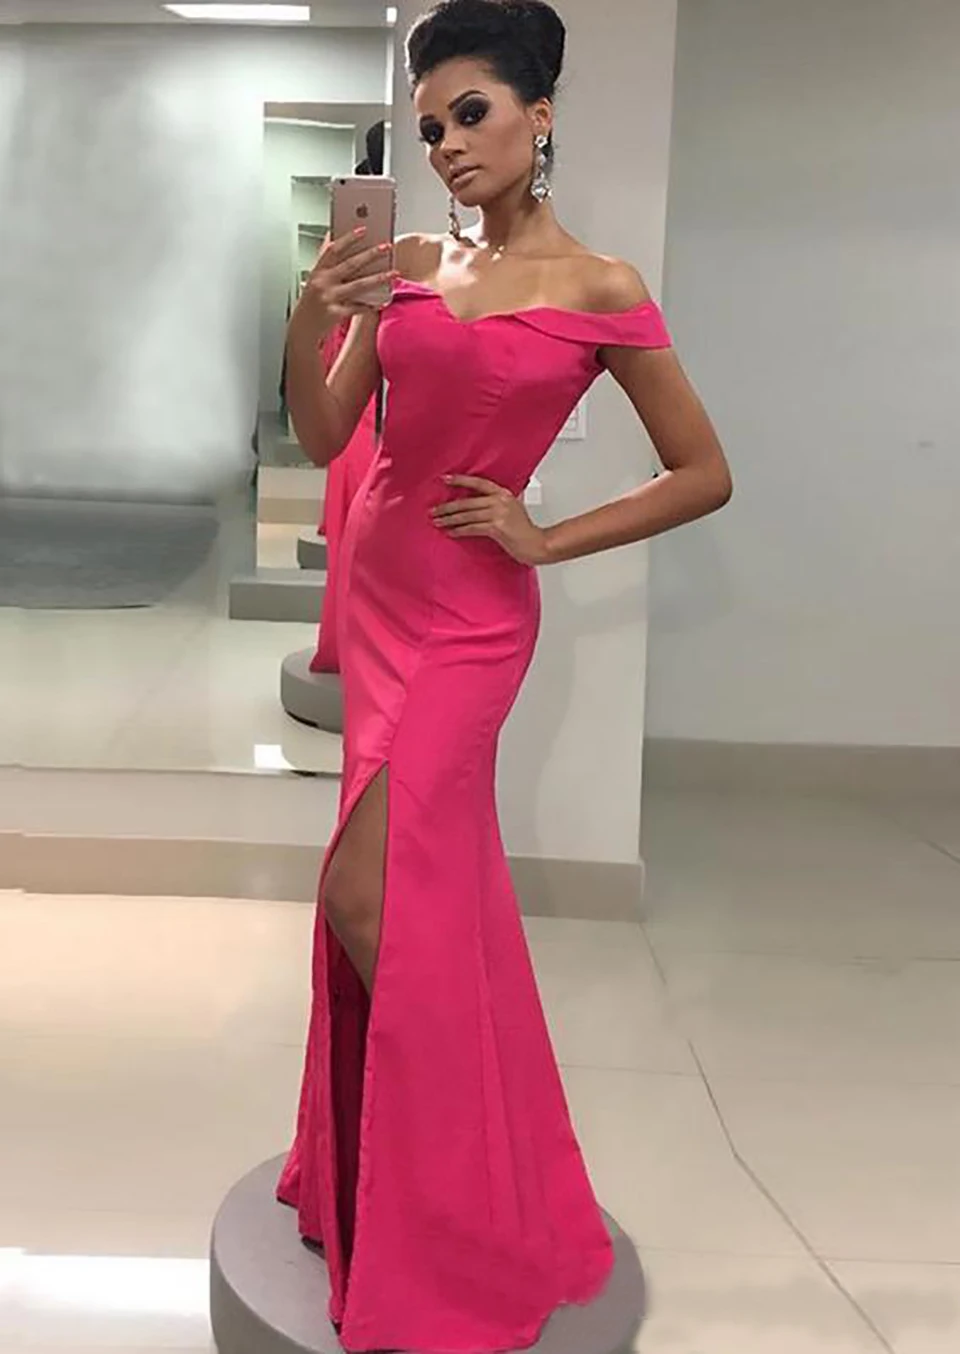 

Sweetheart Sleeveless Prom Party Gown Mermaid Dress Bridesmaid Dresses Elastic Satin Off-Shoulder Thigh-High Slits